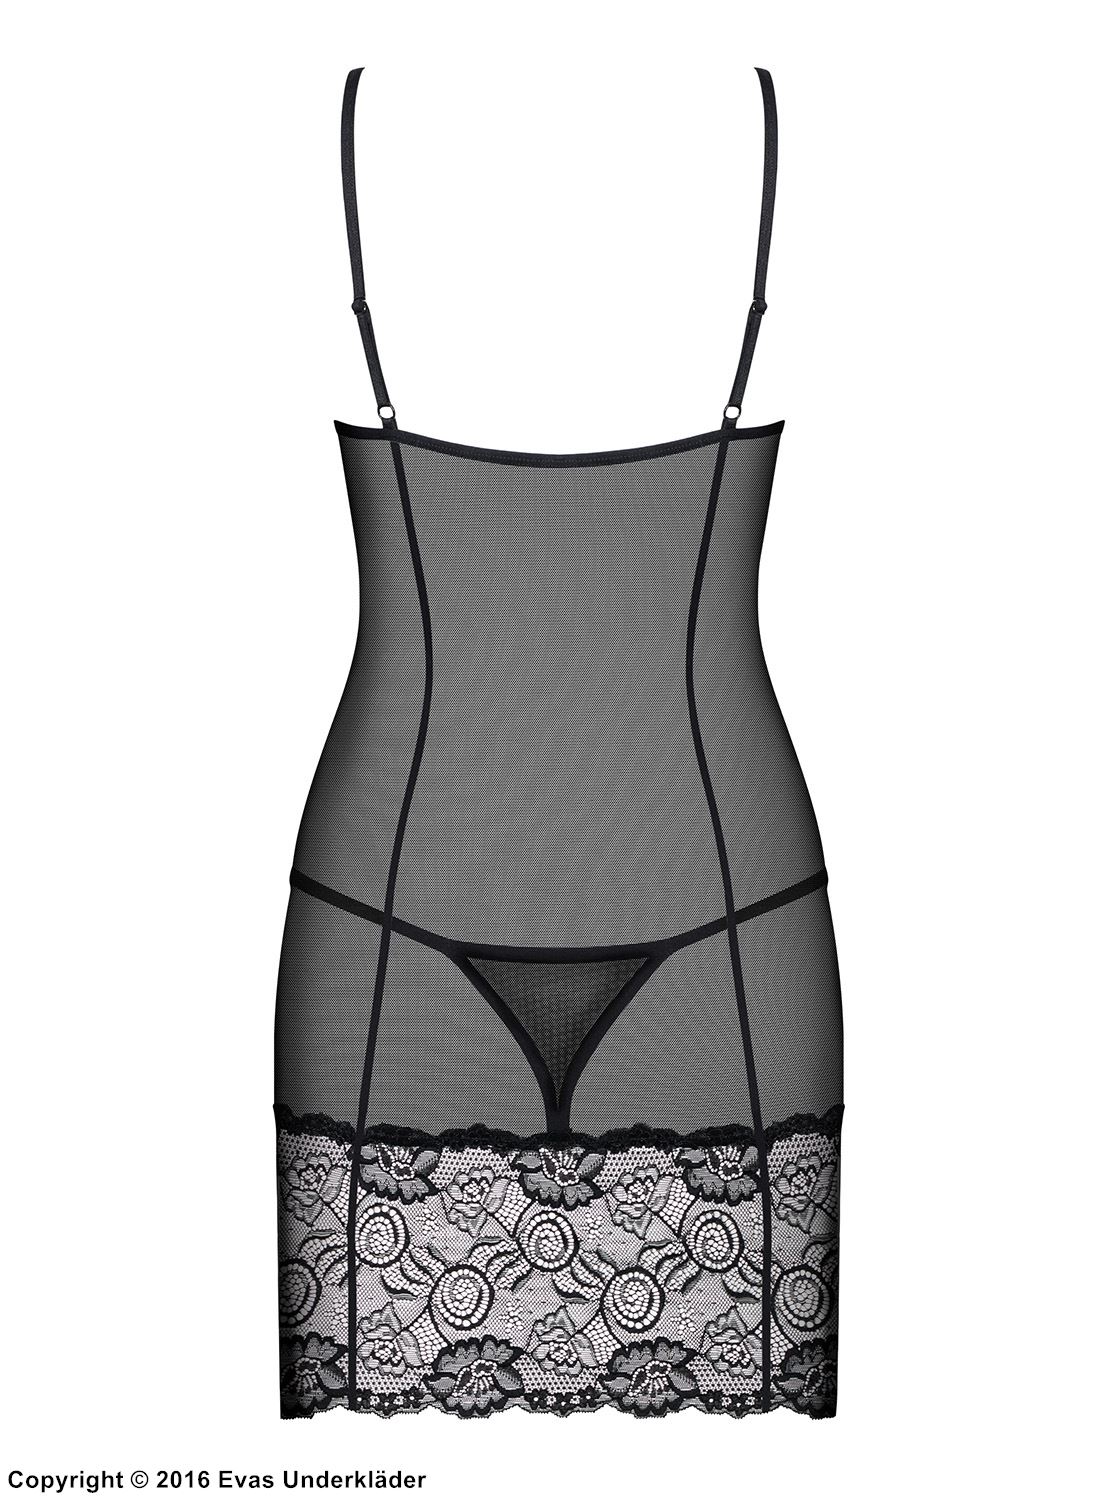 Skin-tight chemise, see-through mesh, lace cups